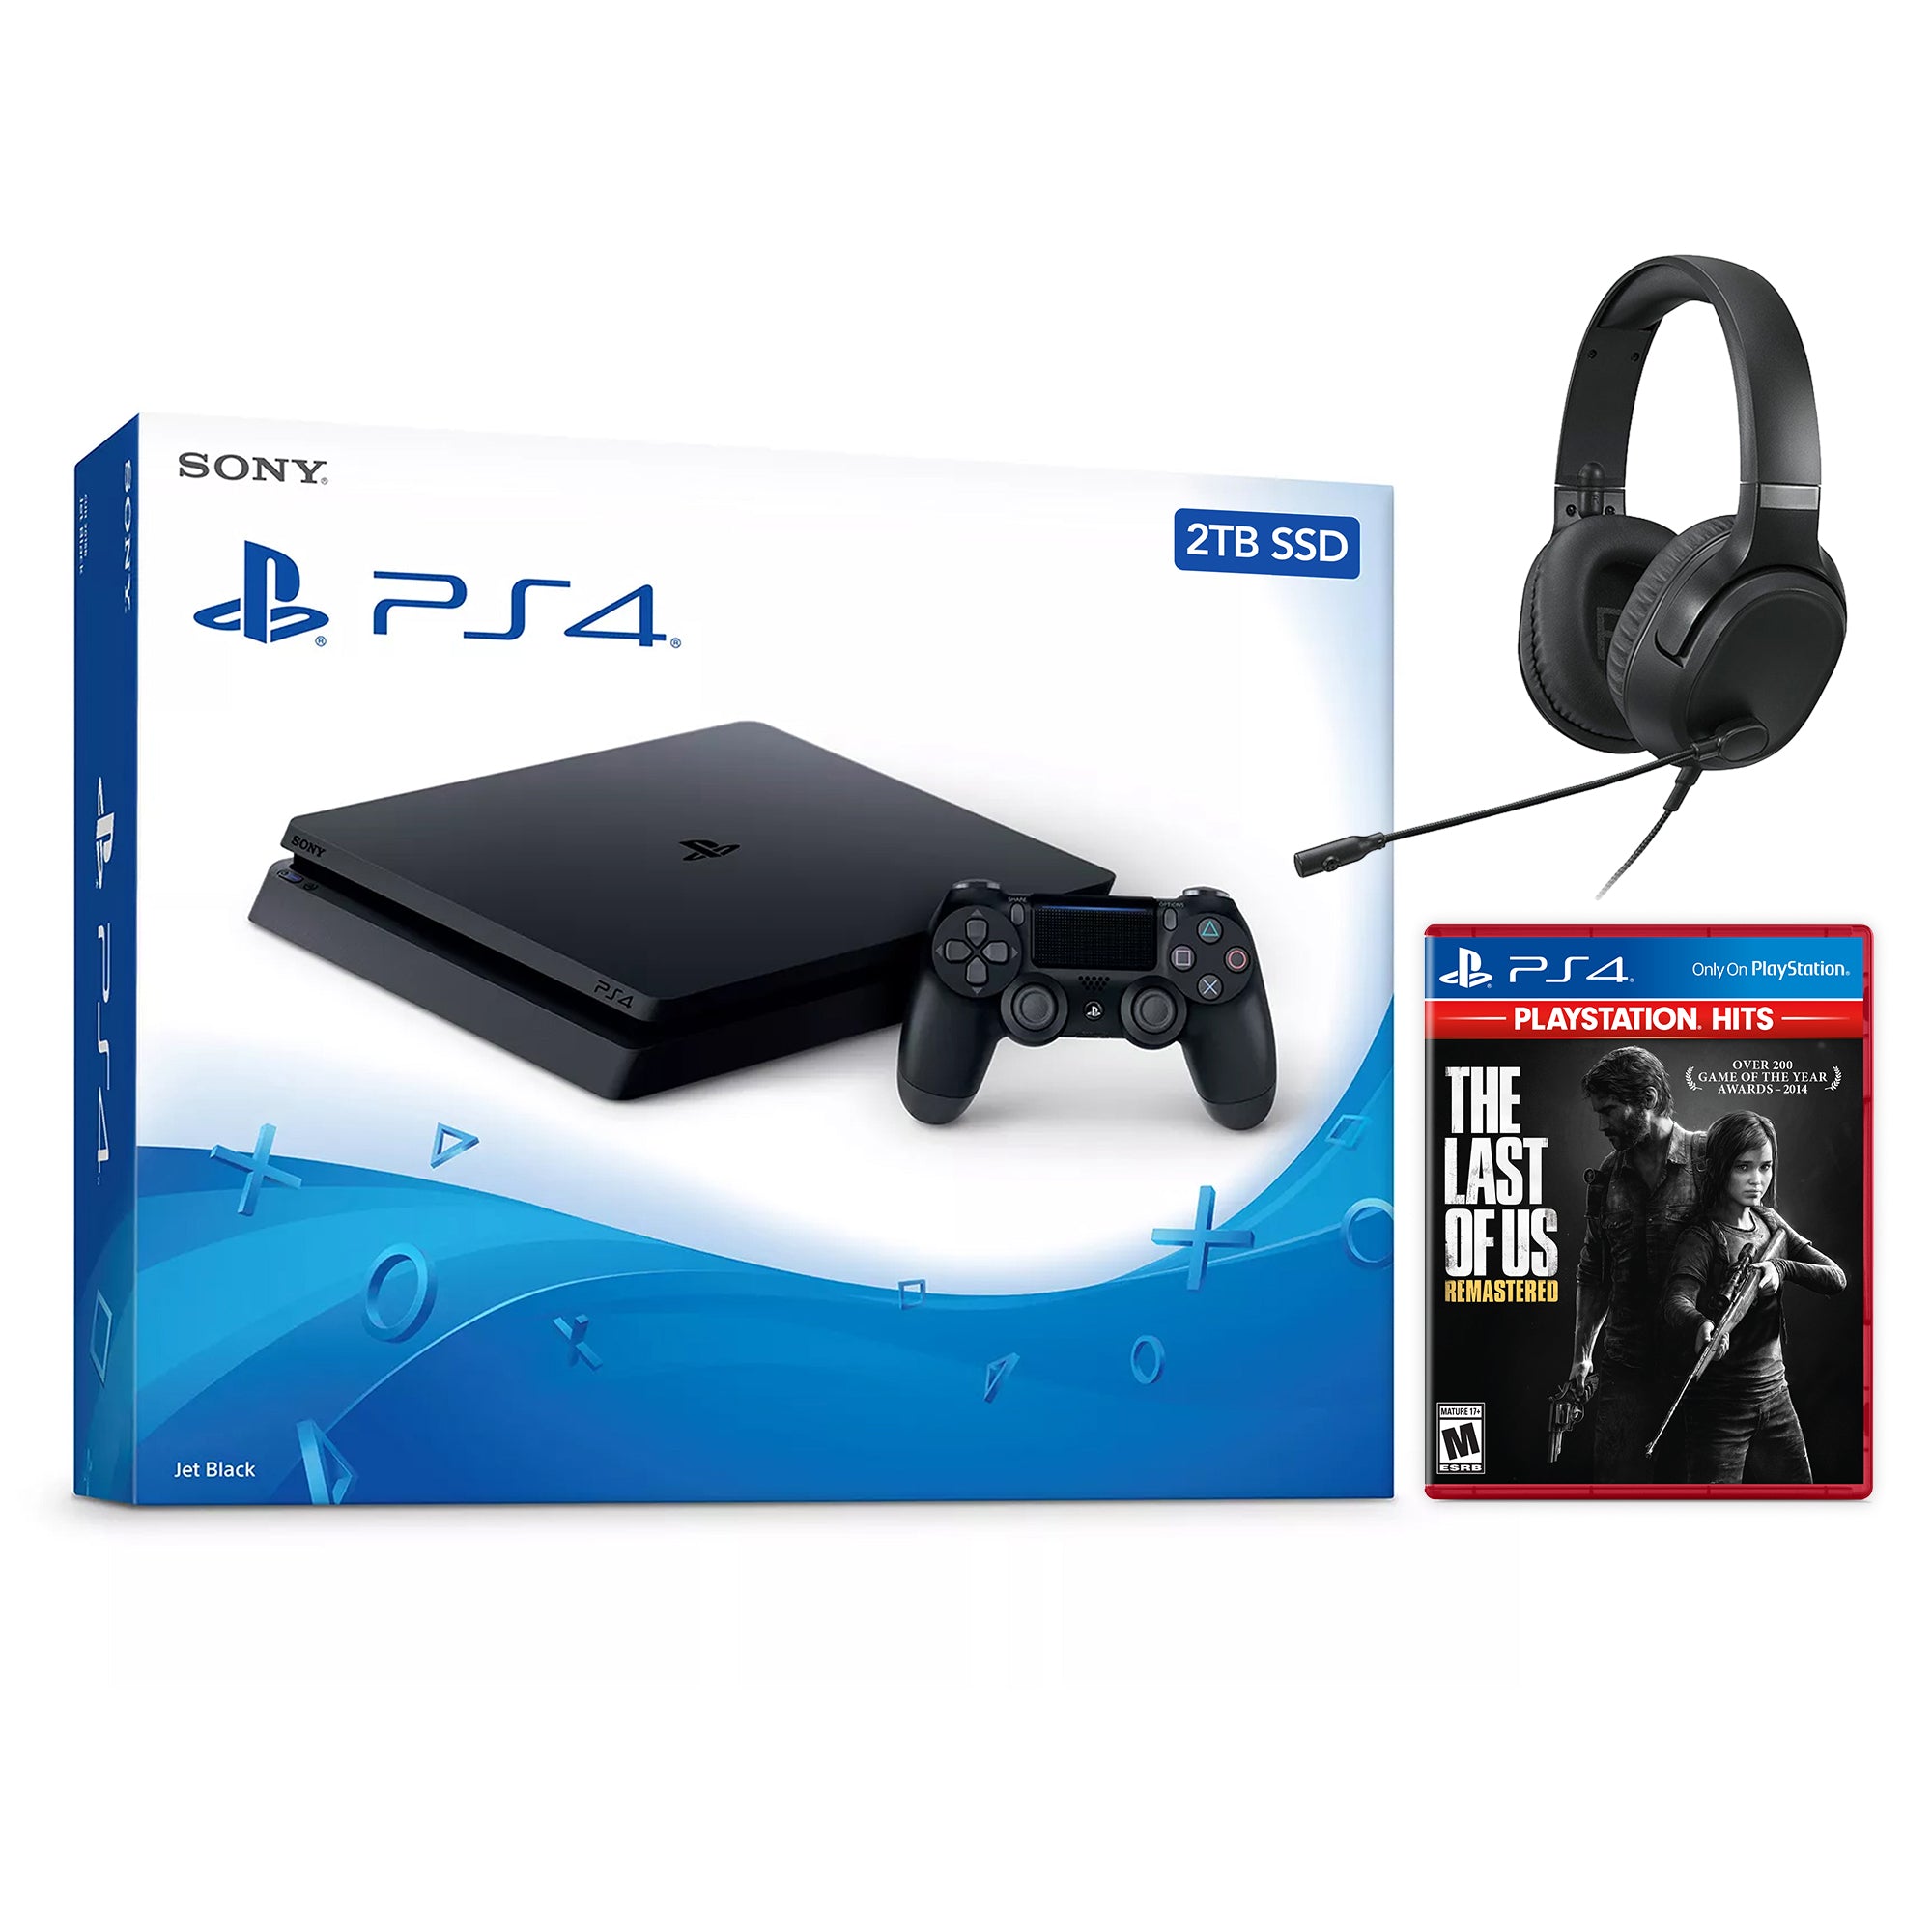 Sony PlayStation 4 Slim Call of Duty Modern Warfare II Bundle Upgrade 2TB SSD PS4 Gaming Console, Jet Black, with Mytrix Chat Headset - 2TB Internal Fast Solid State Drive Enhanced PS4 Console